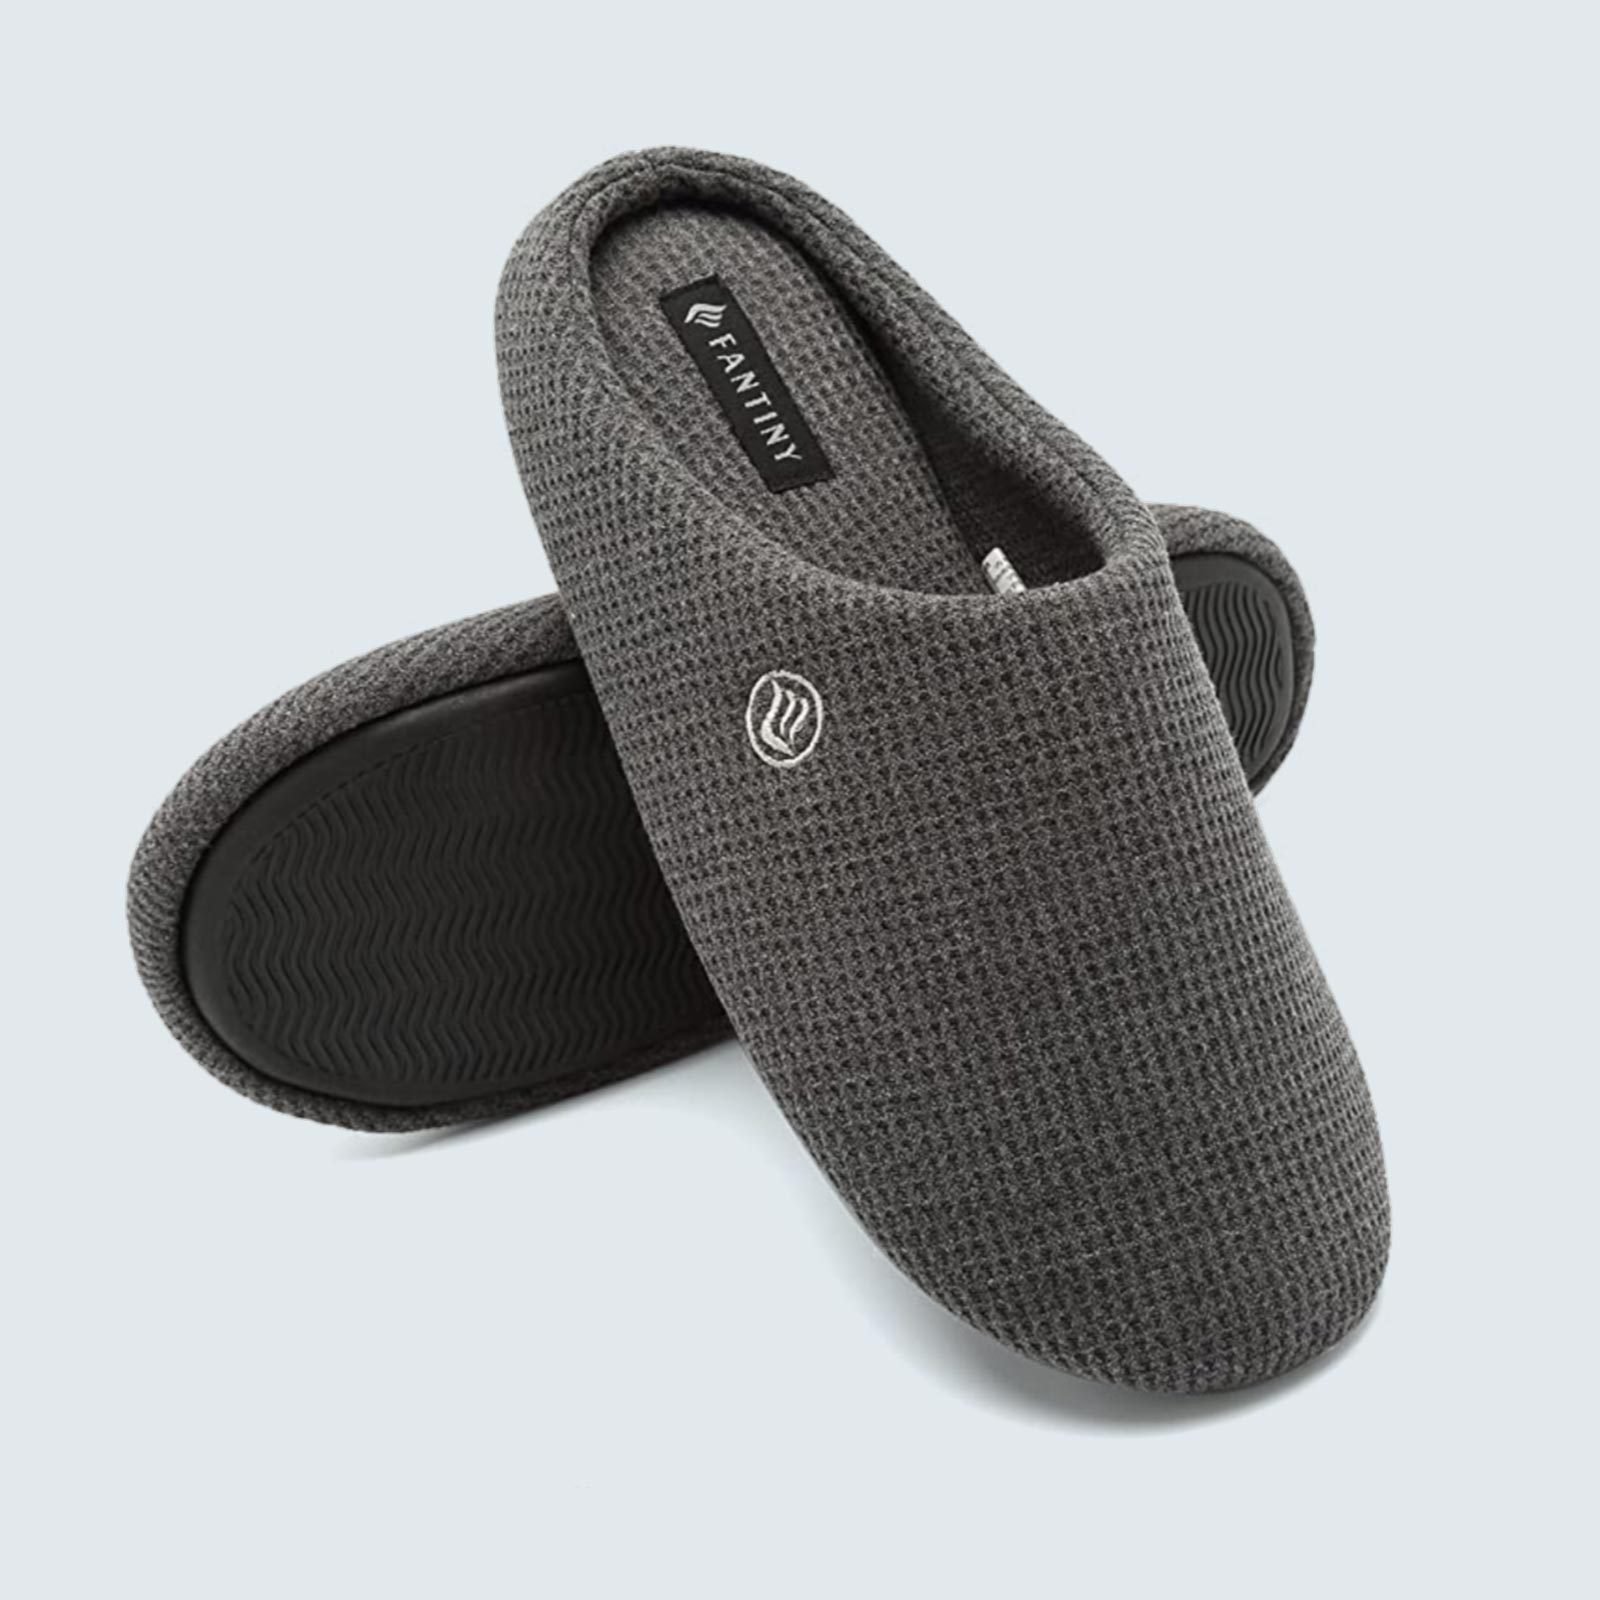 Best Men's Slippers 2021 Comfy Men's Slippers for the House and More